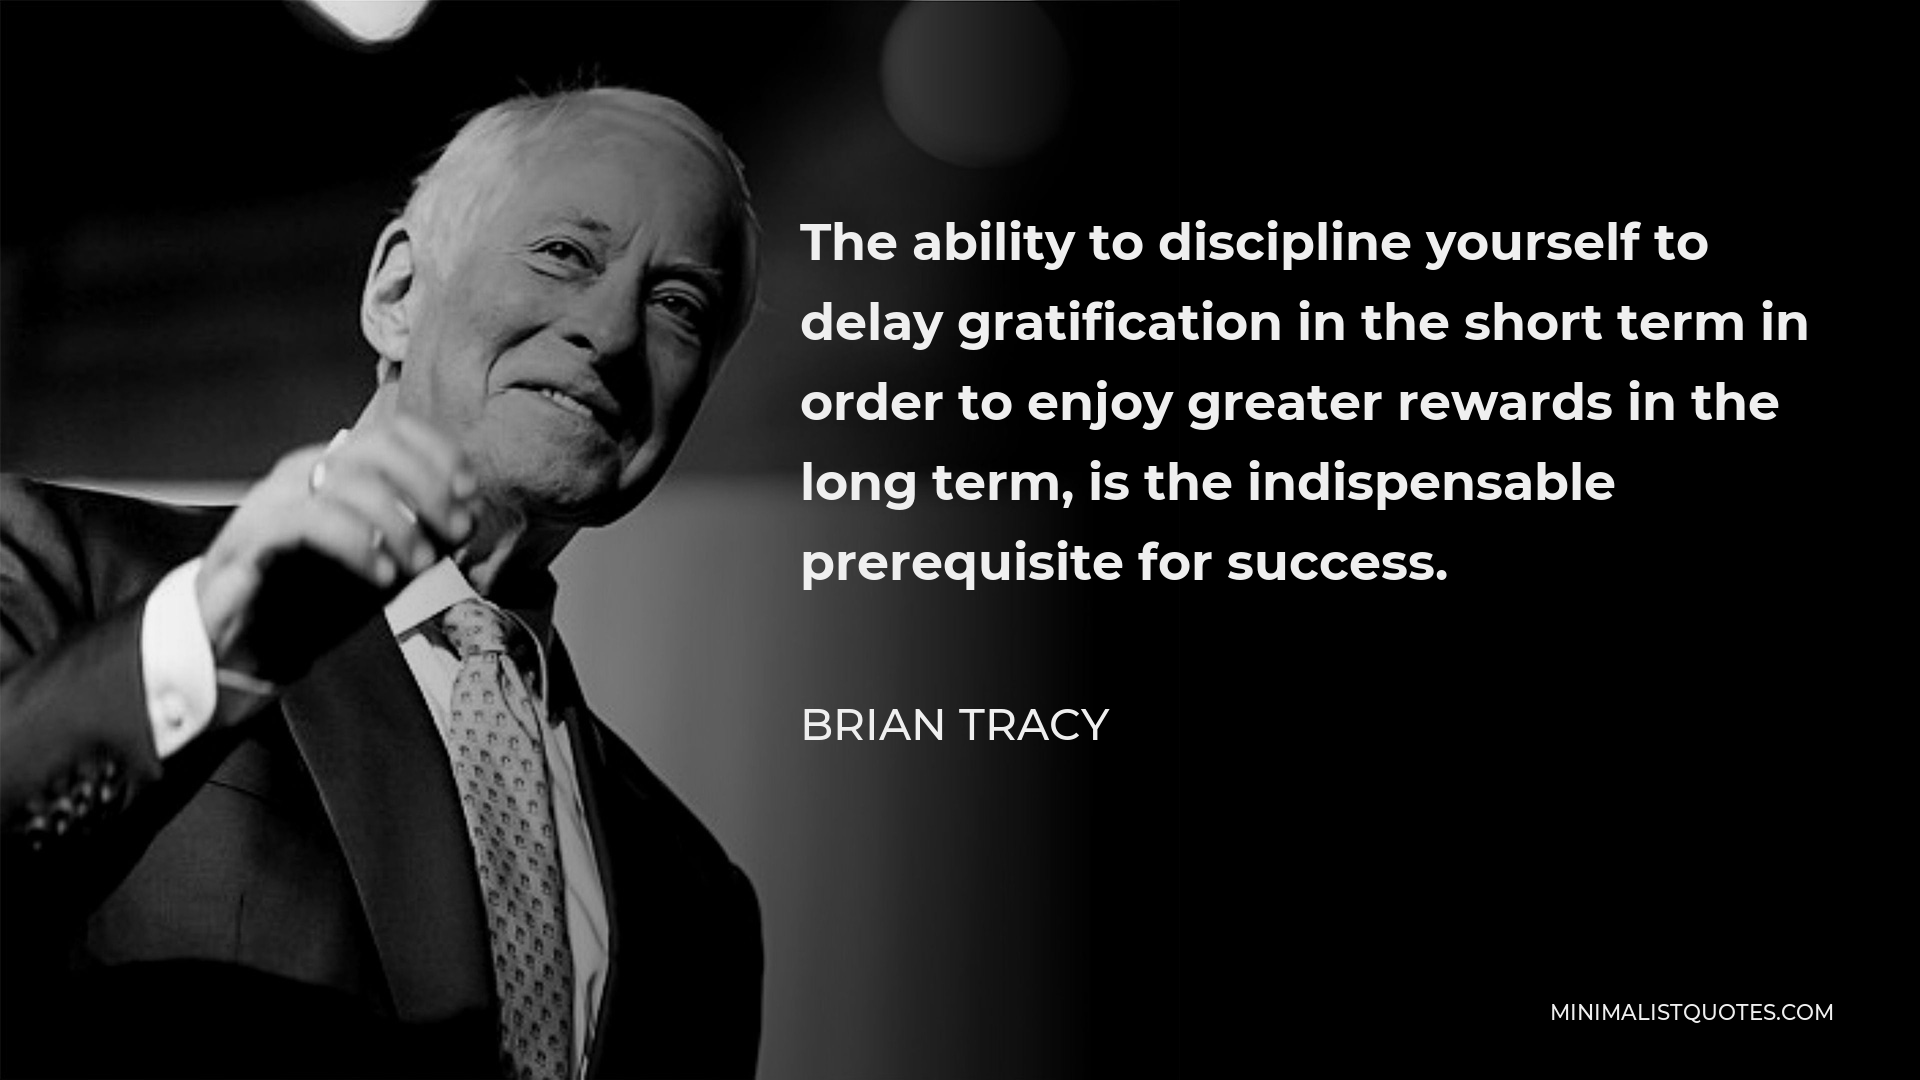 Brian Tracy Quote - The ability to discipline yourself to delay gratification in the short term in order to enjoy greater rewards in the long term, is the indispensable prerequisite for success.